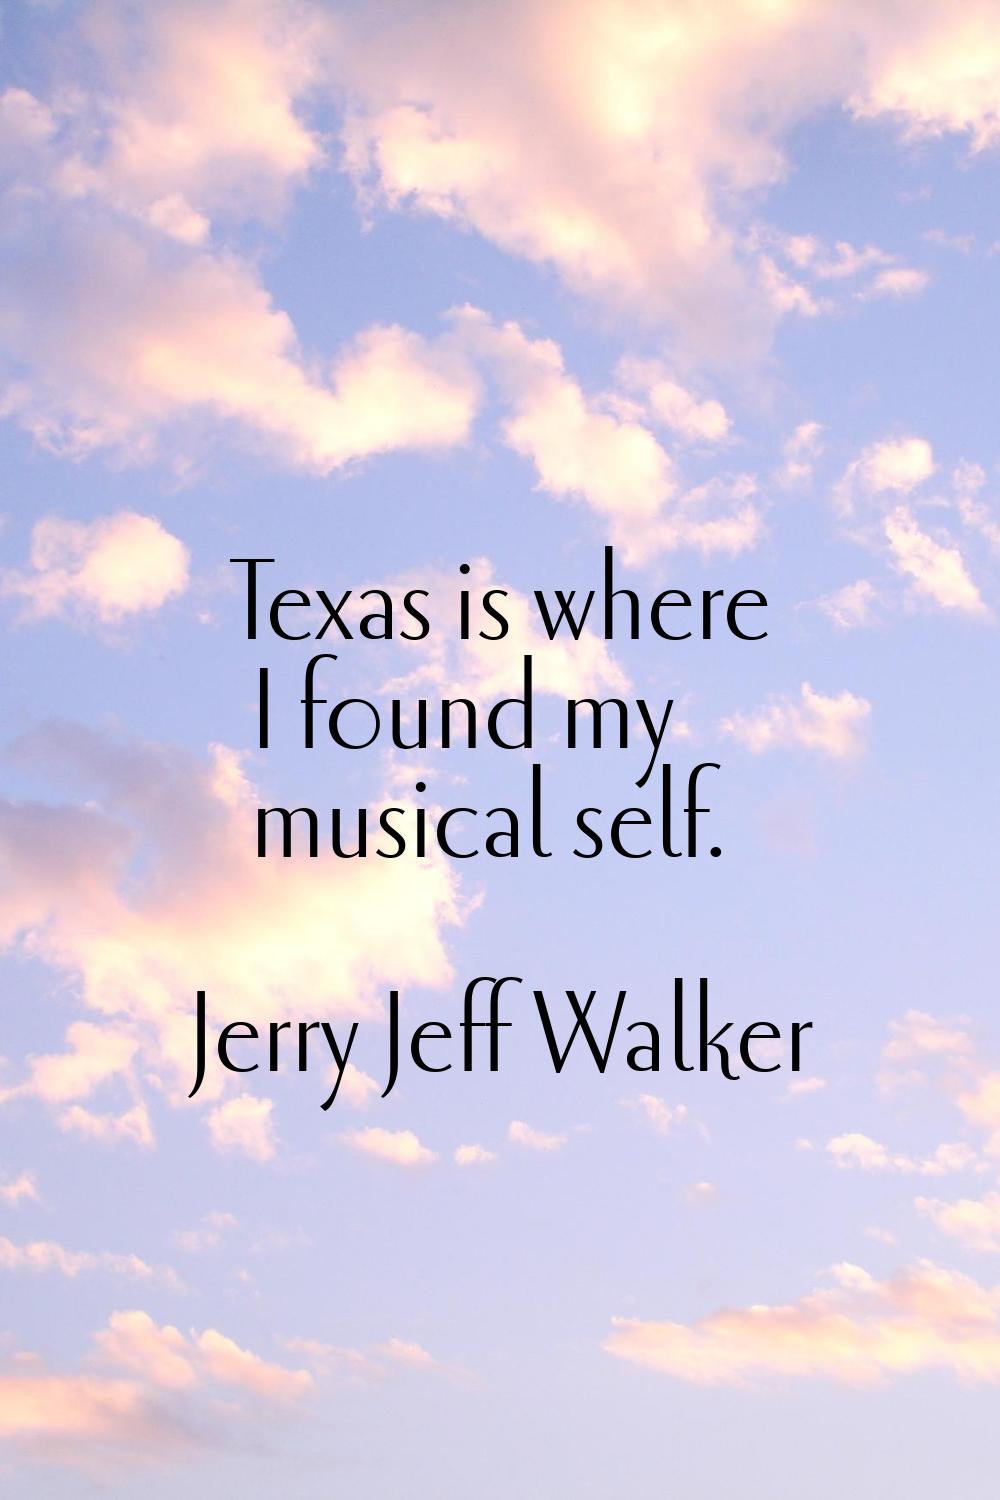 Texas is where I found my musical self.